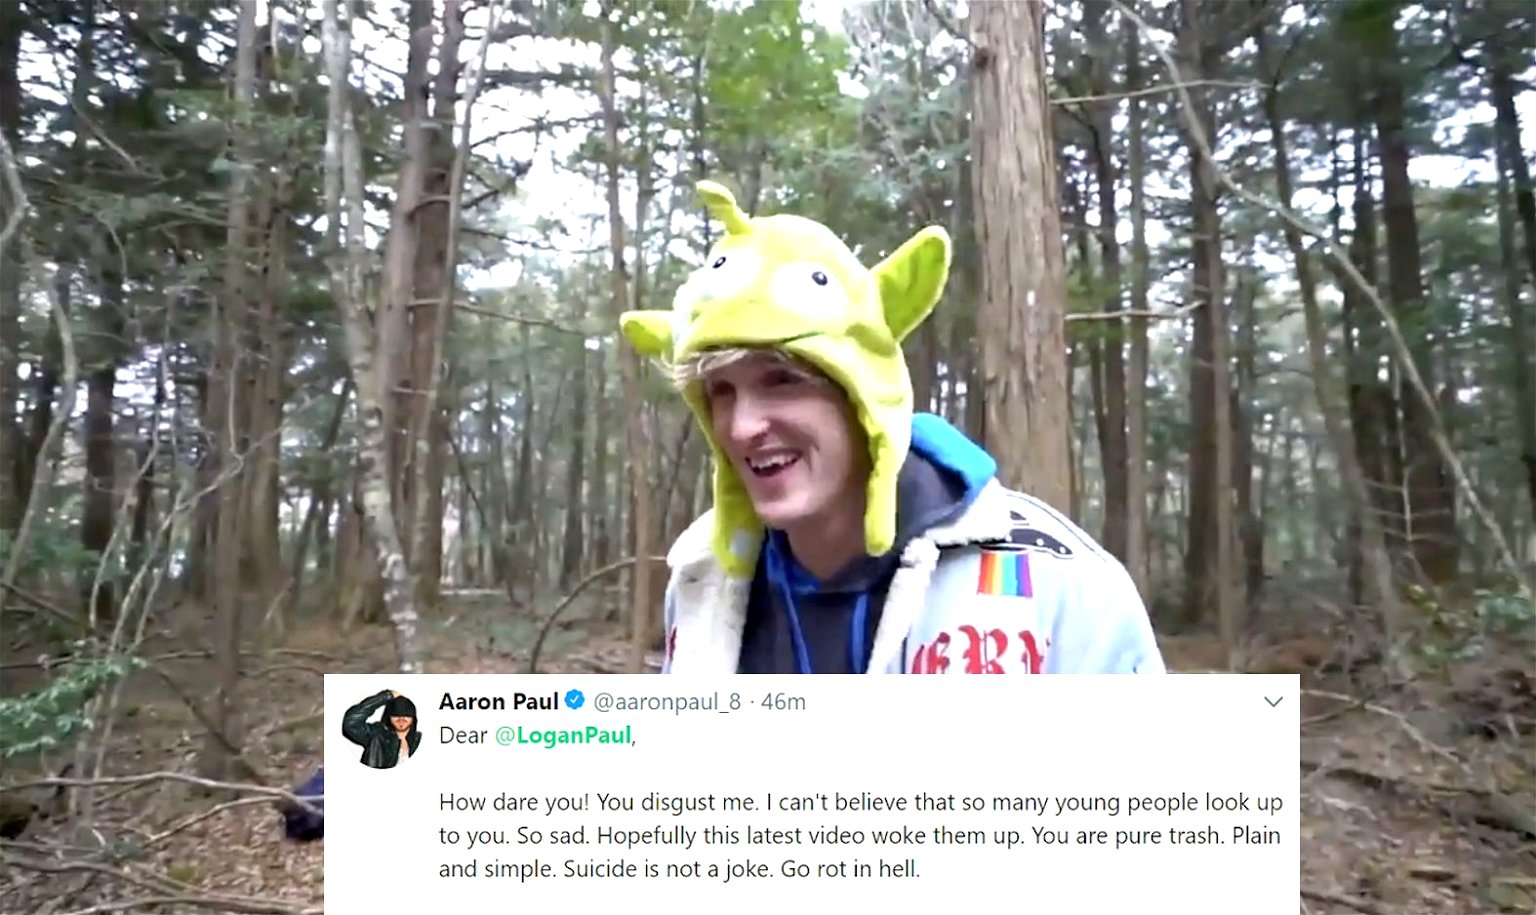 Logan Paul Who Loves Making Racist Asian Jokes Shows Japanese Suicide Victim’s Body in VLOG